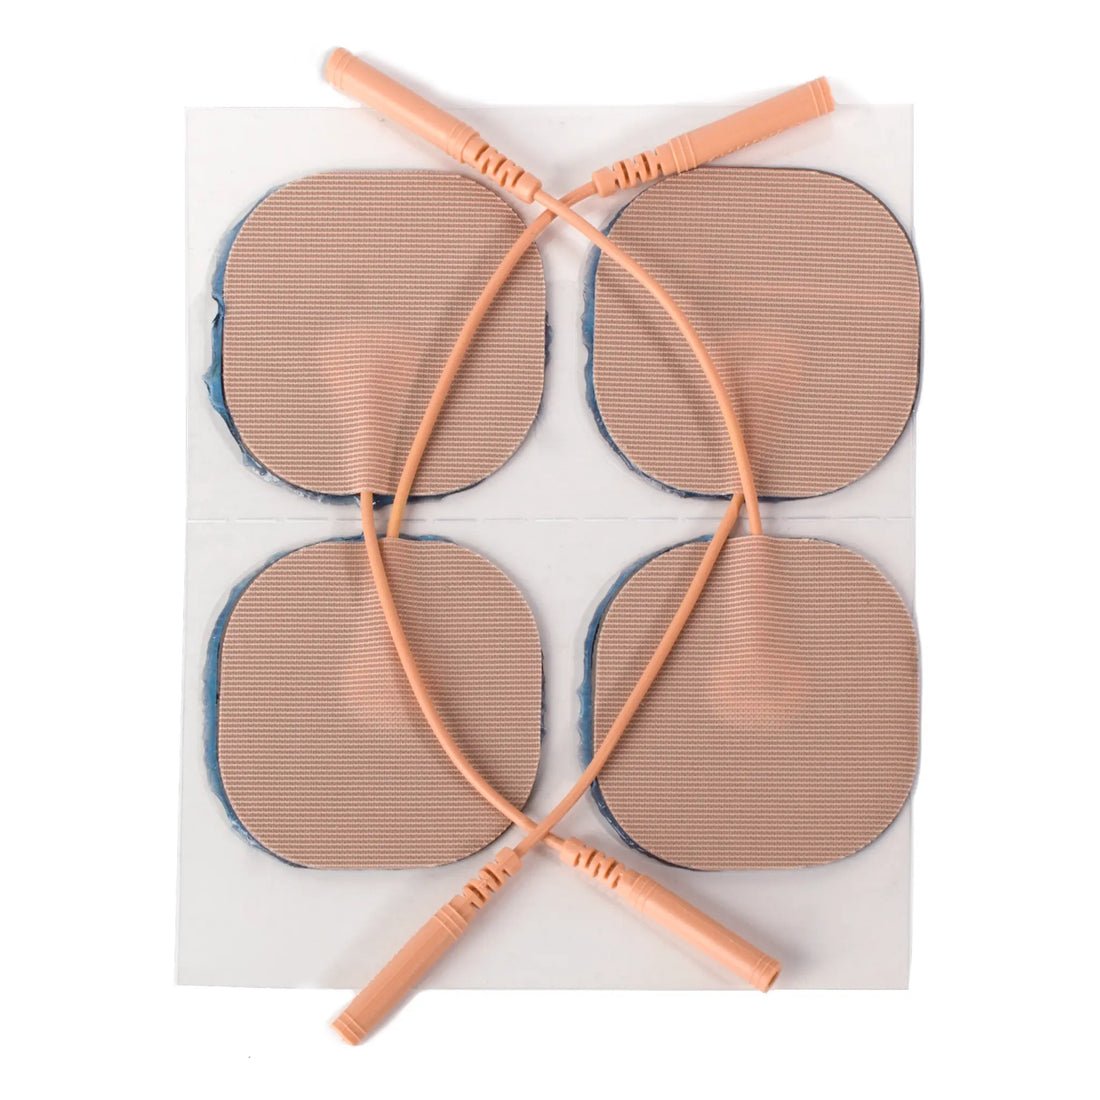 photo of conductive pads for sensitive skin - round